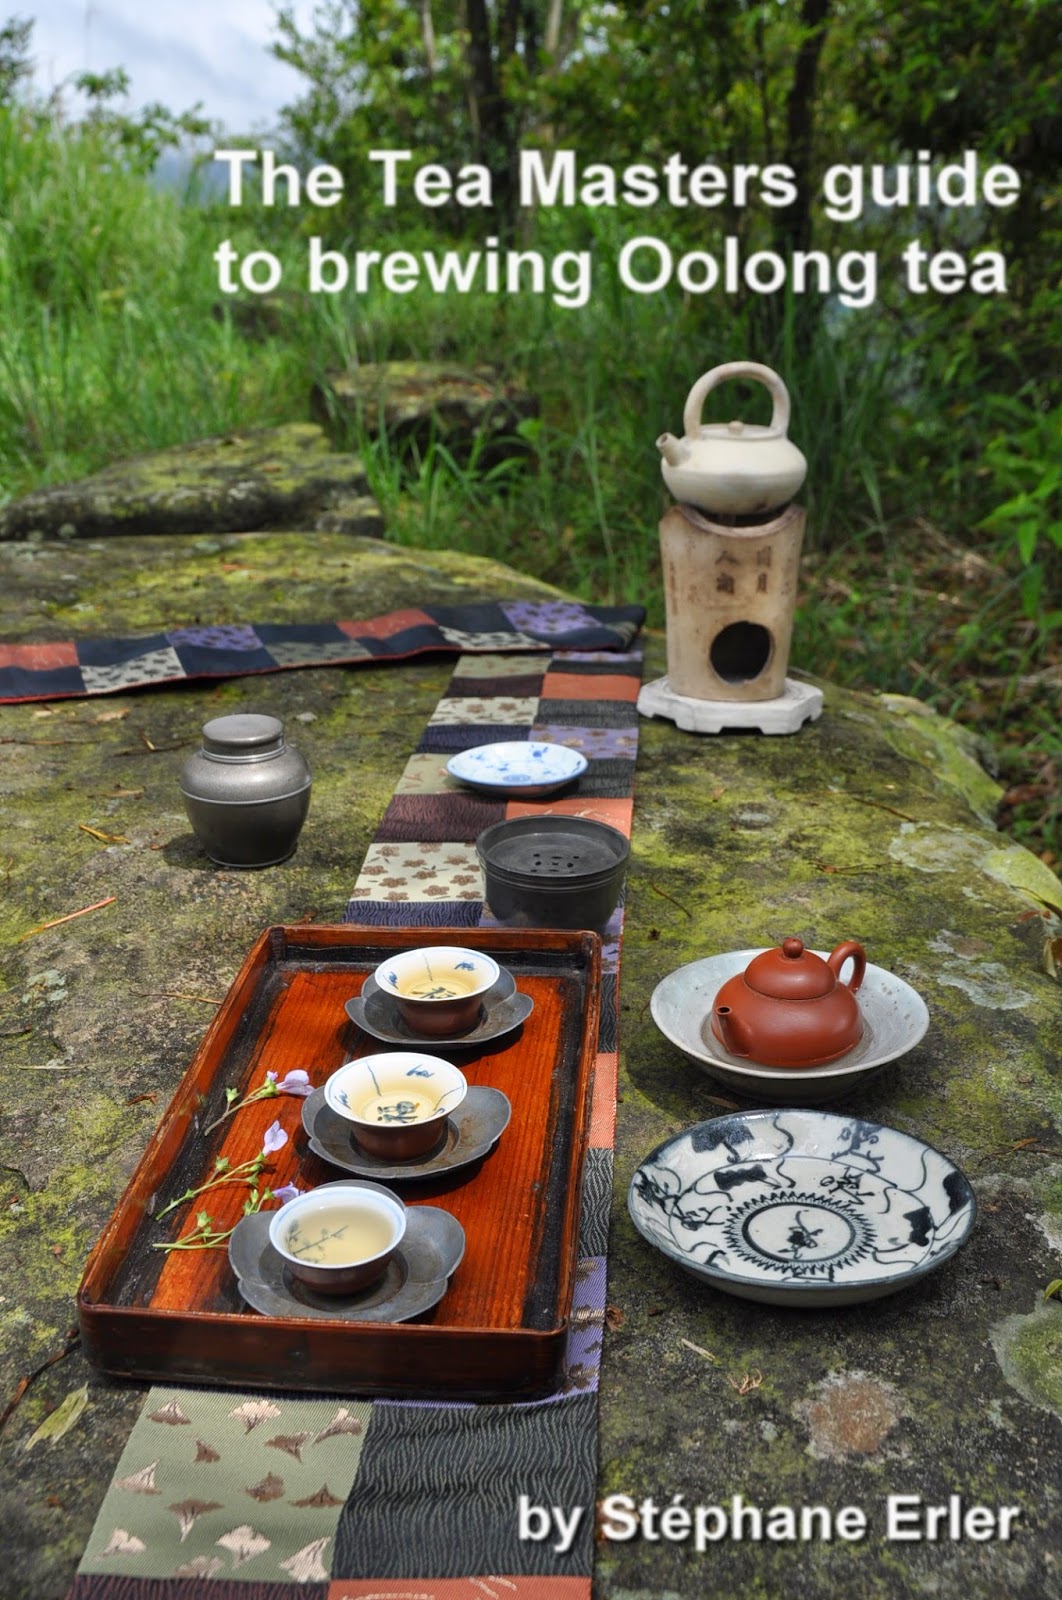 The Tea Masters guide to brewing Oolong tea